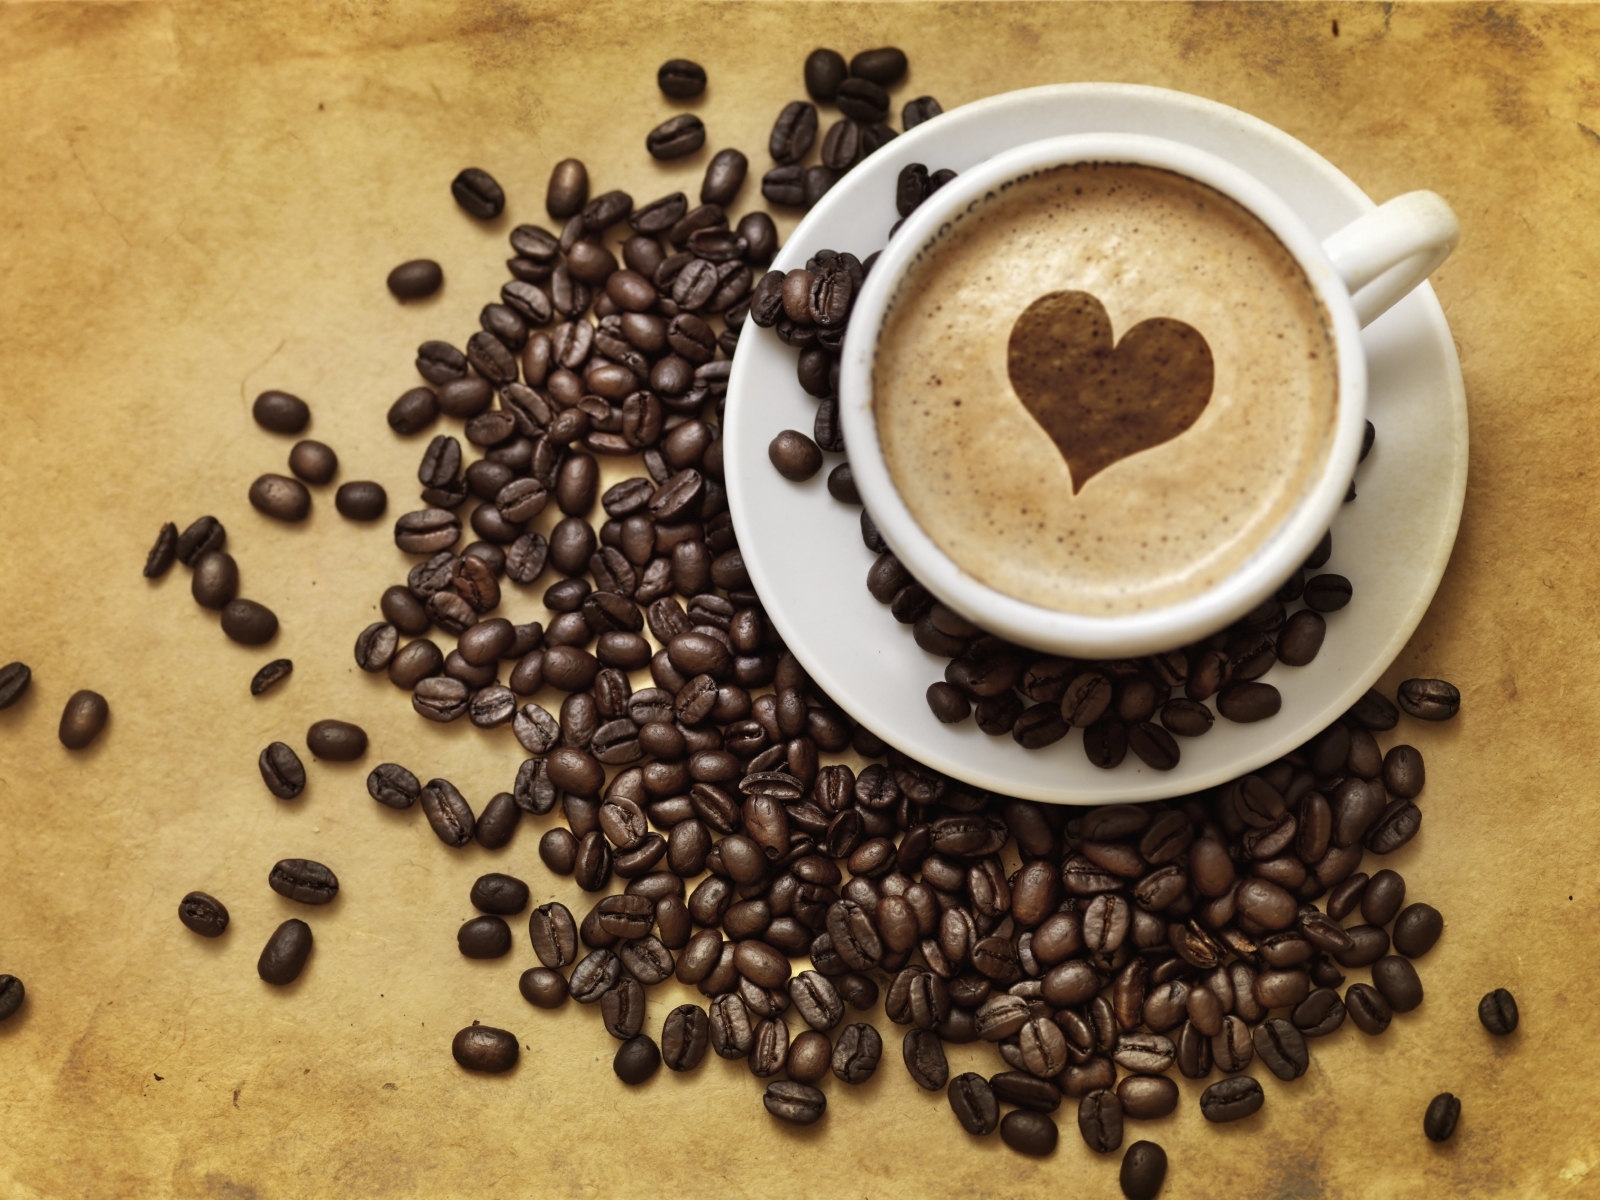 love, food, hearts, valentine's day, drinks, coffee Image for desktop